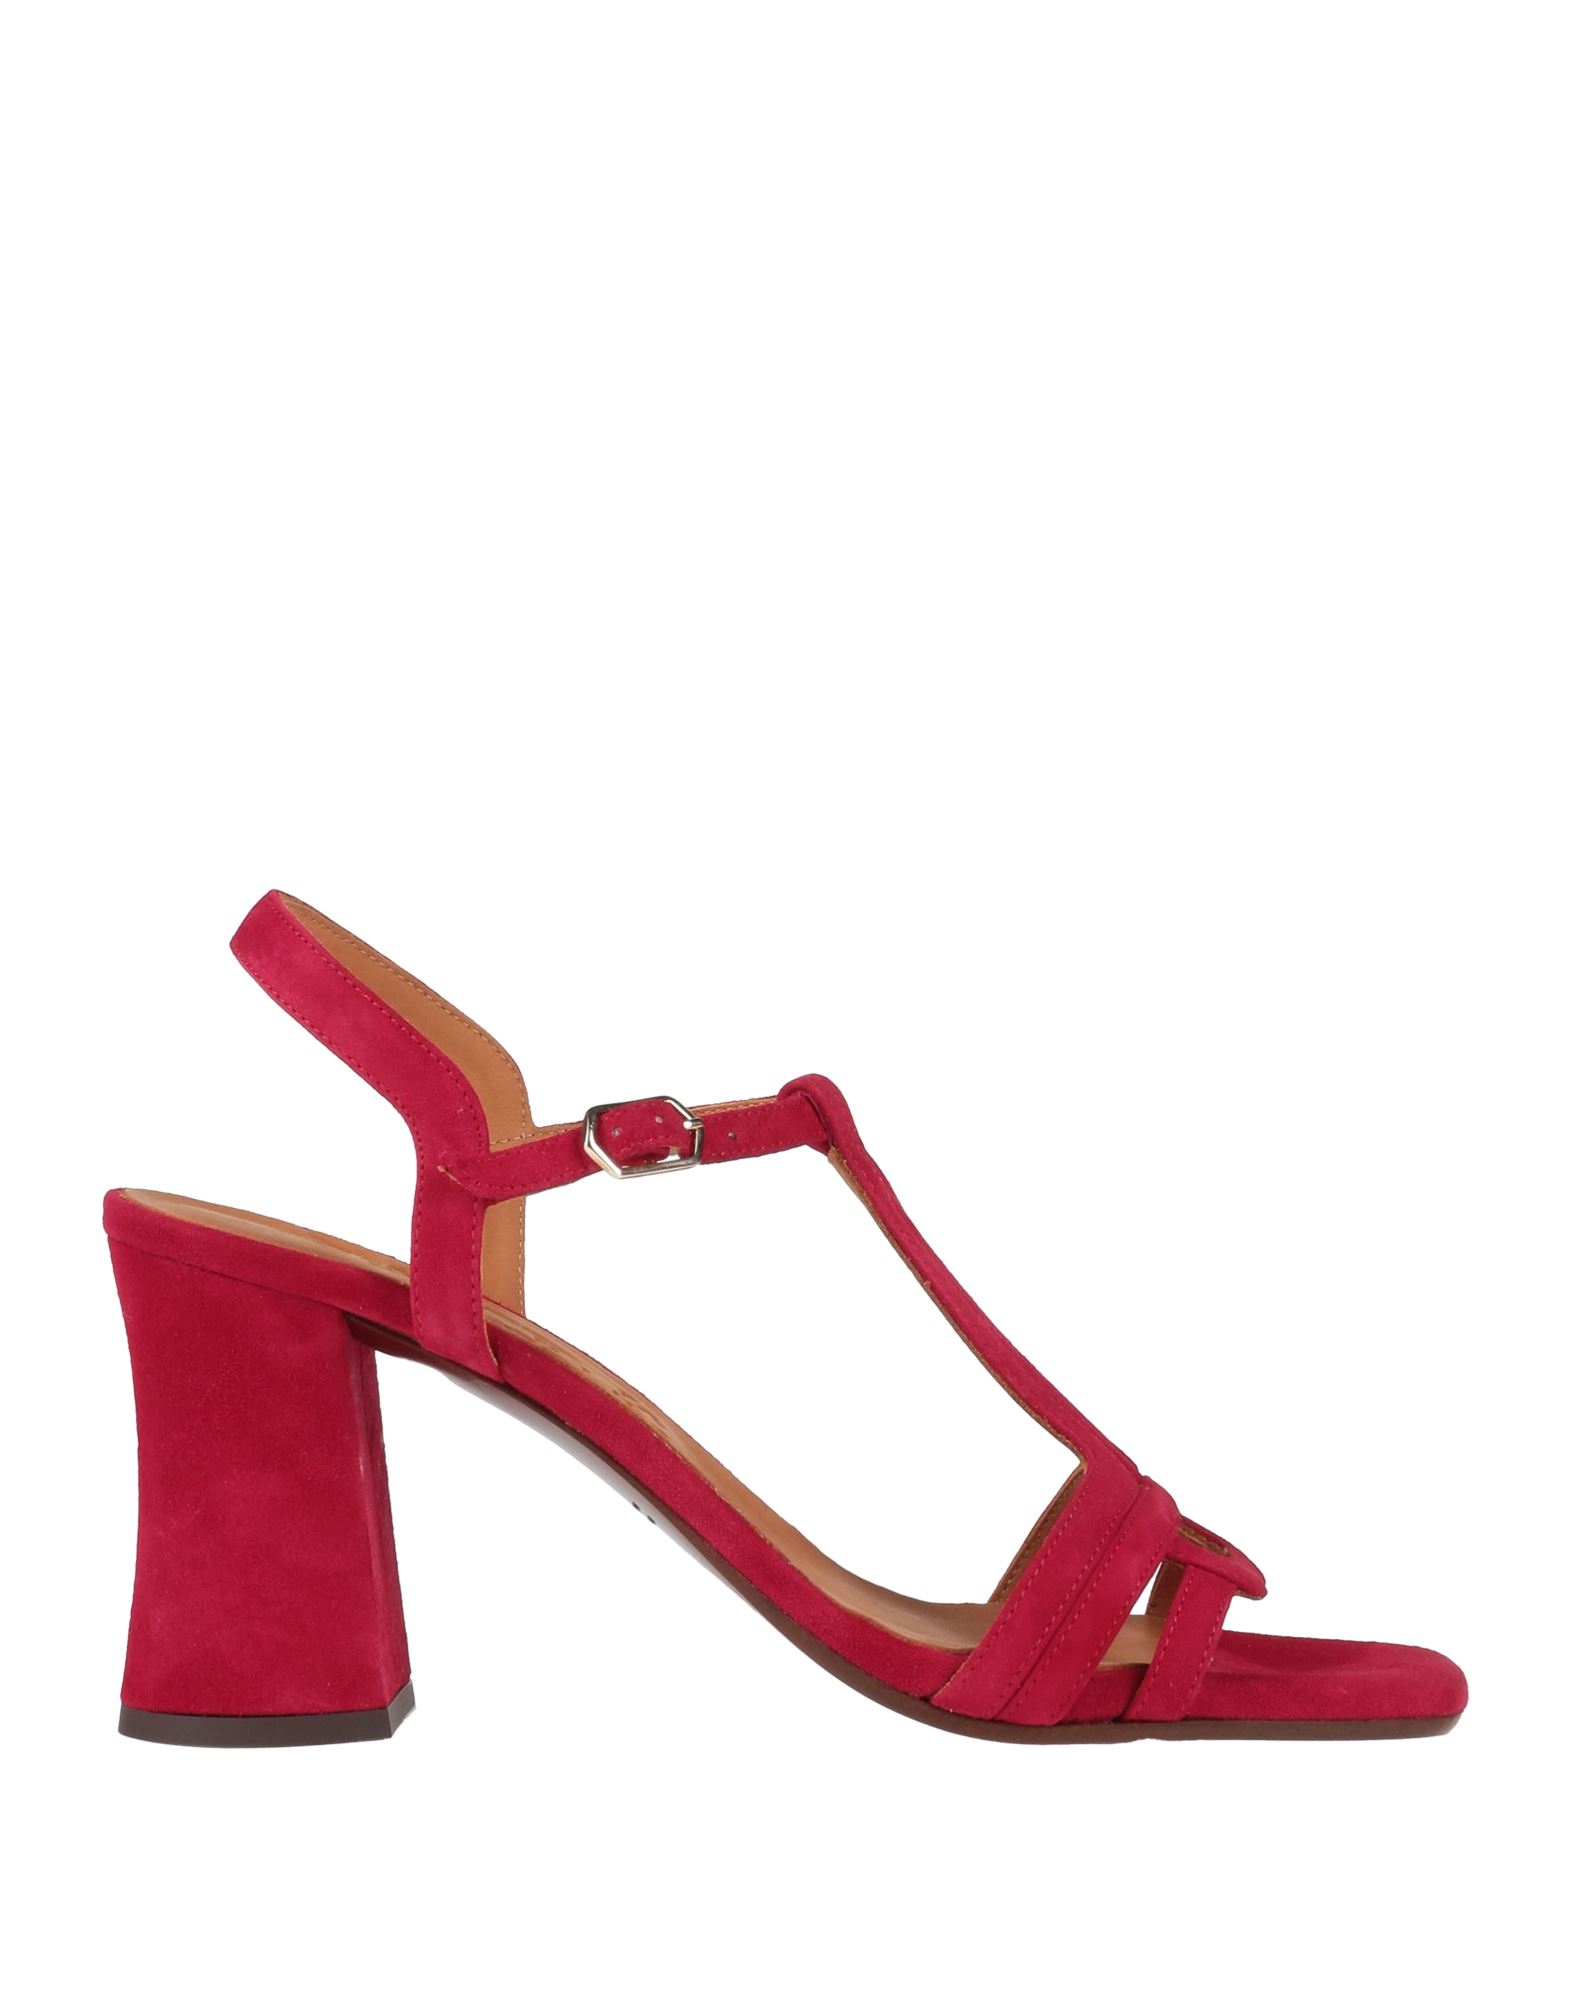 Chie Mihara Sandals In Red